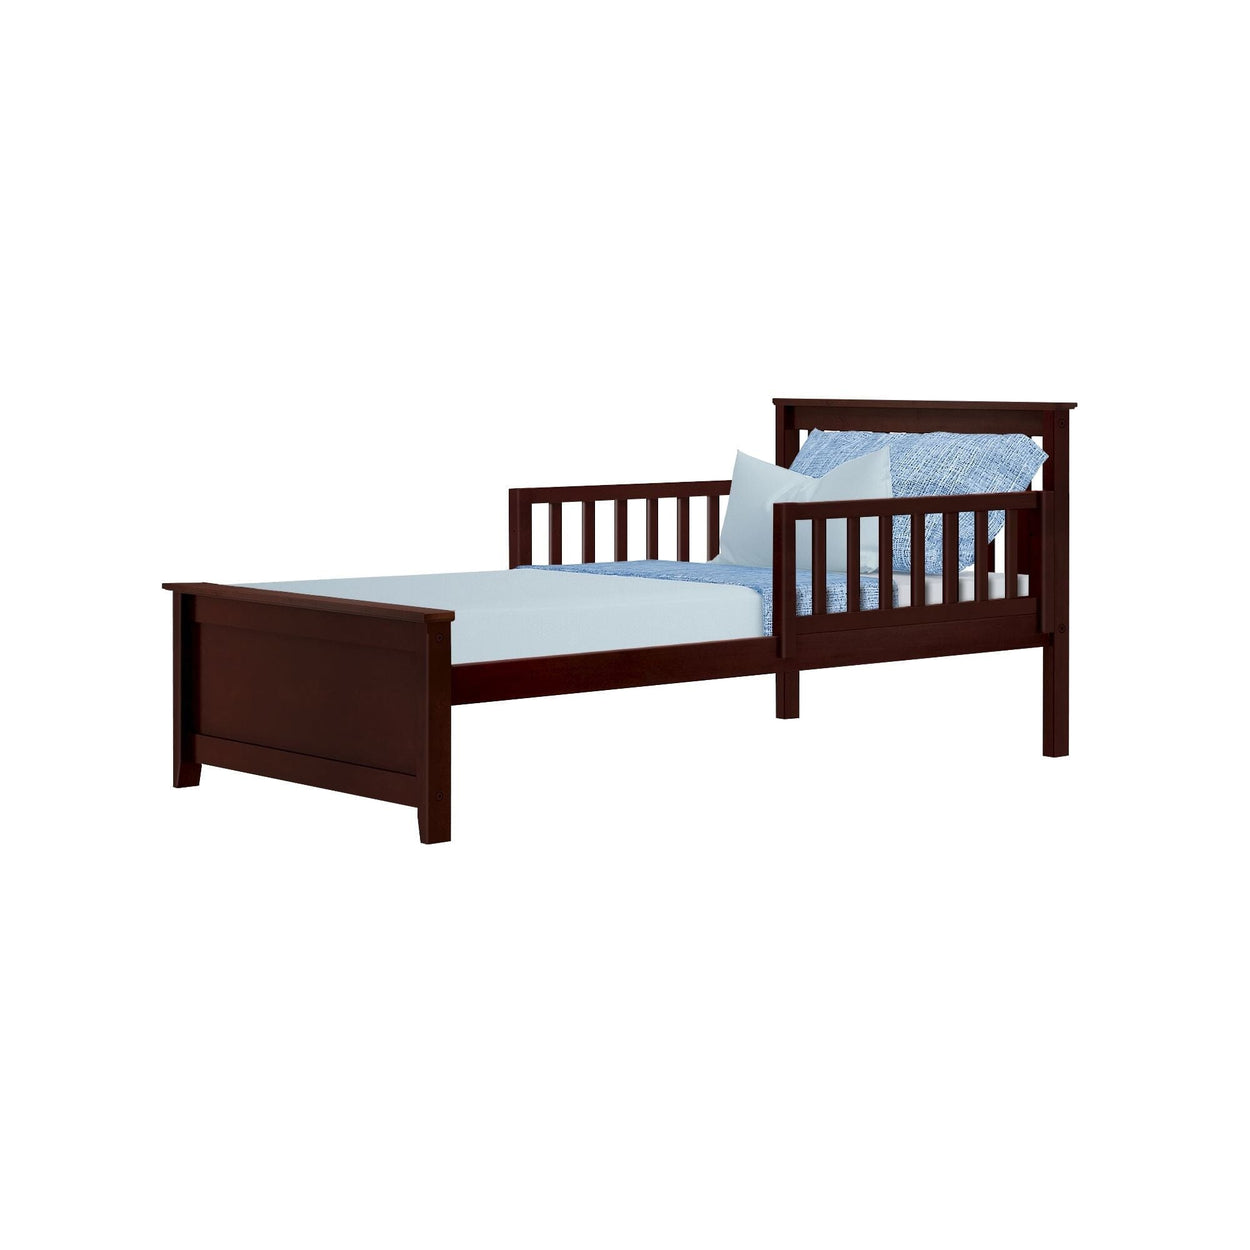 180210005209 : Kids Beds Twin Bed with Two Guard Rails, Espresso